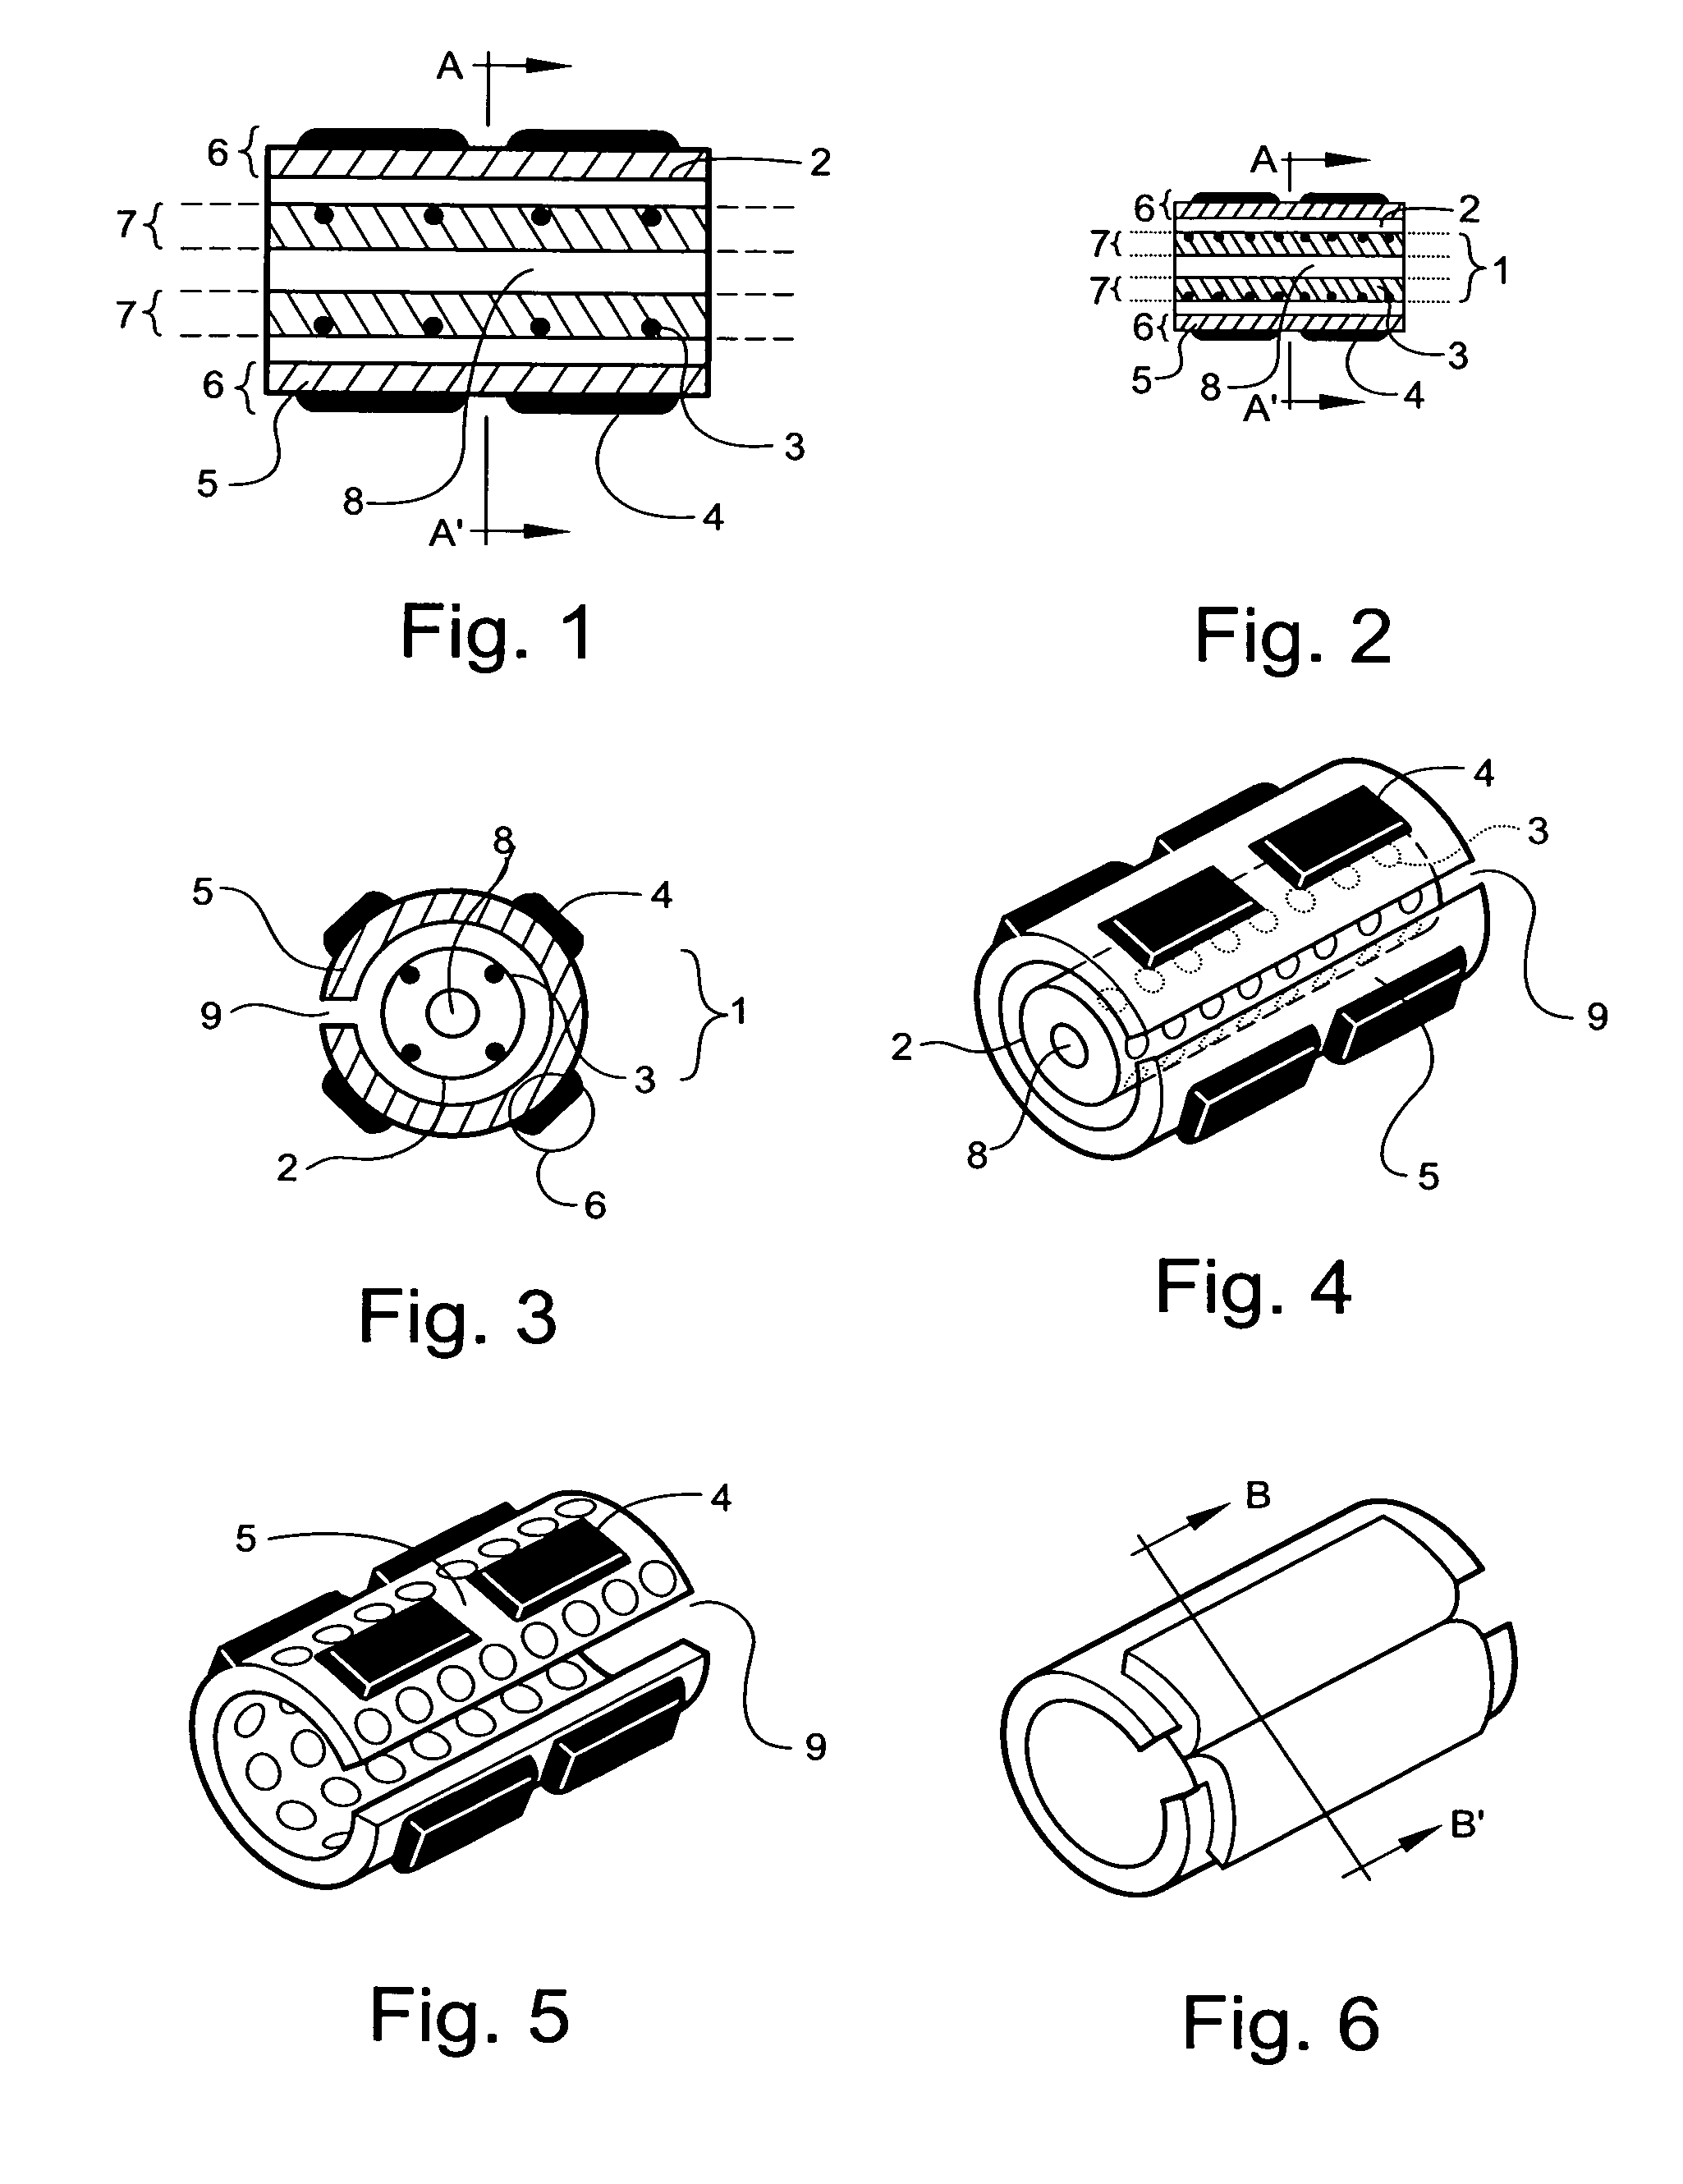 Integrated system for the ballistic and nonballistic infixion and retrieval of implants